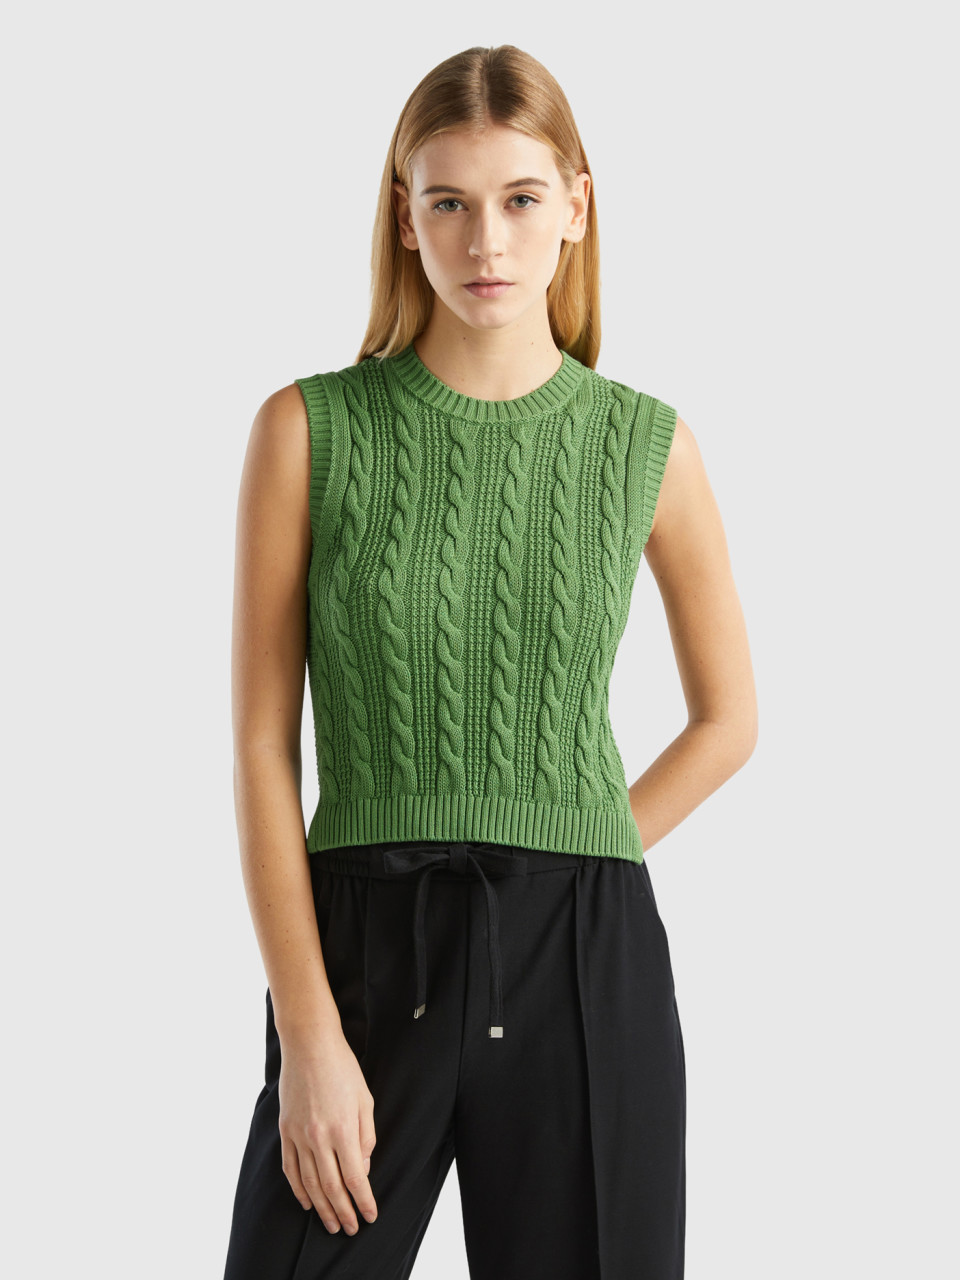 Benetton, Cropped Cable Knit Vest, Military Green, Women